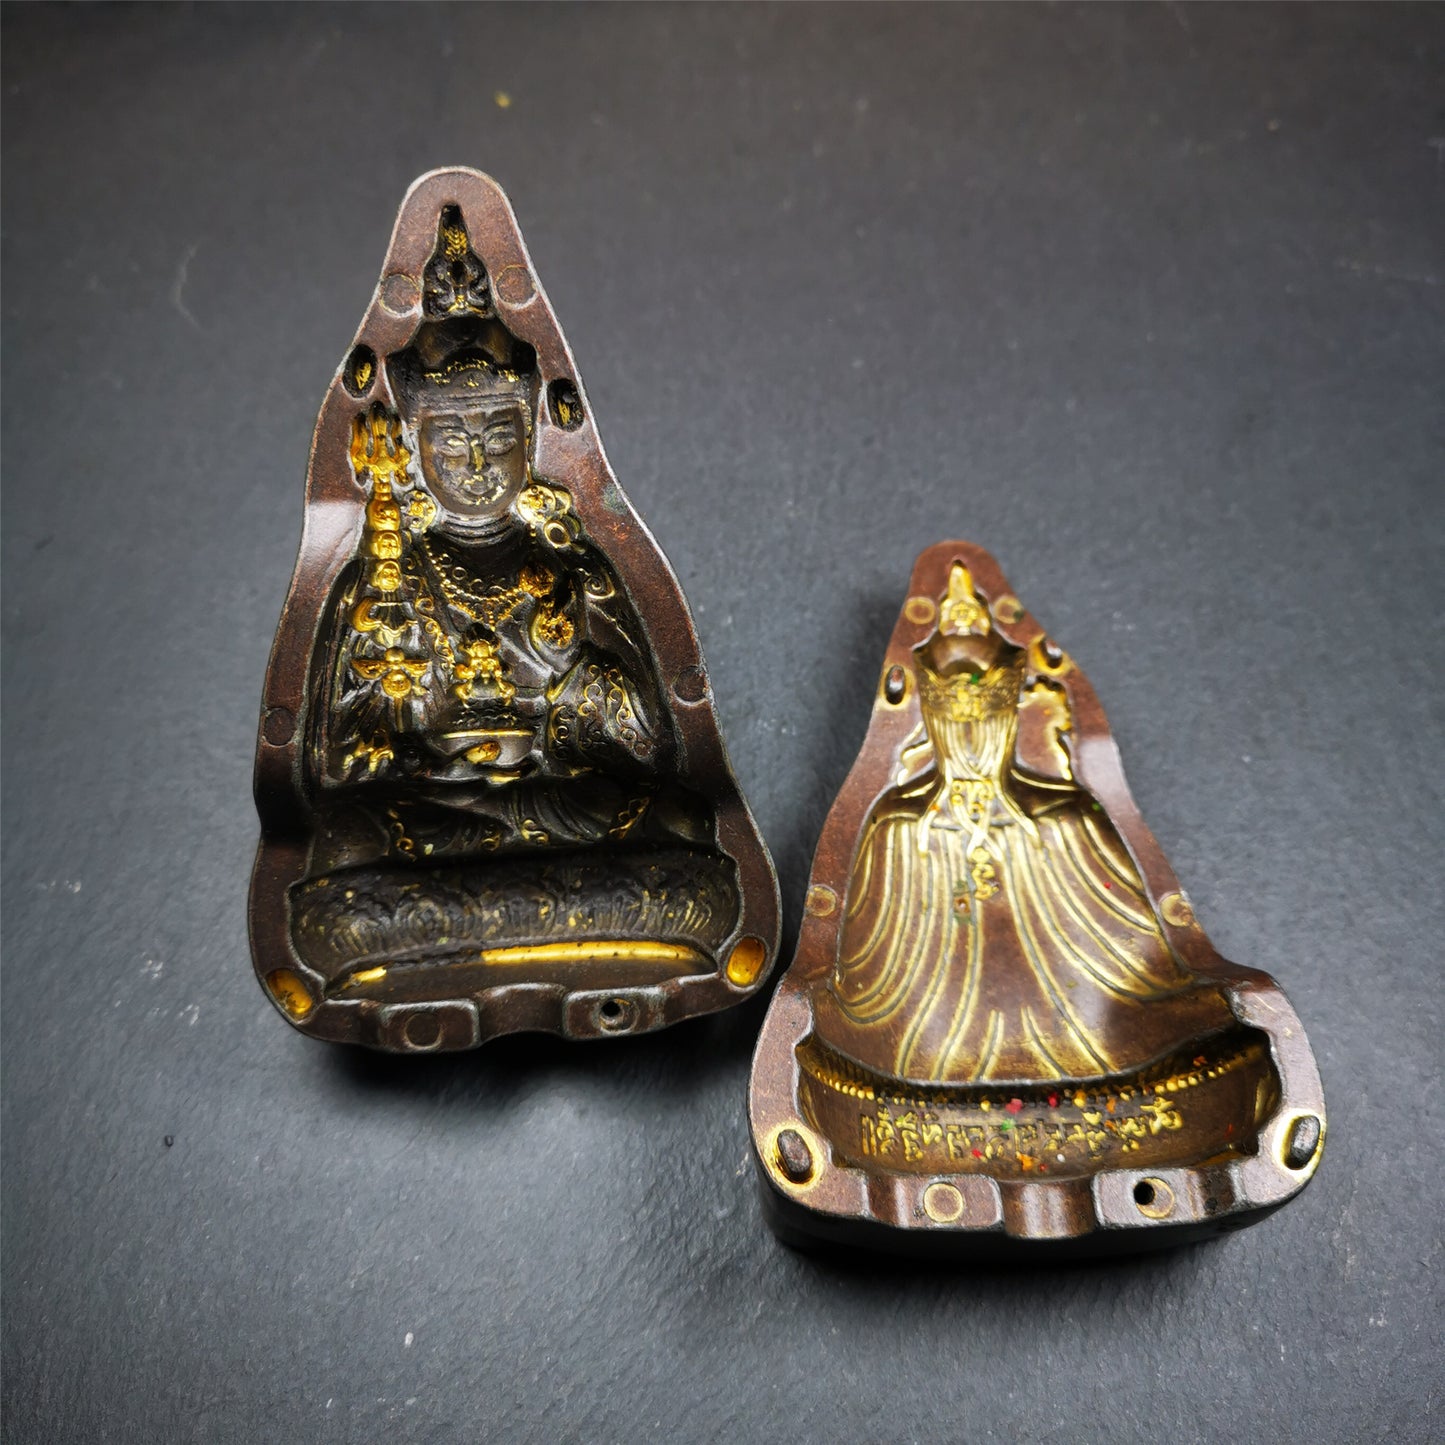 This unique Padmasambhava,Guru Rinpoche Tsa-Tsa buddha statue mold is made by Tibetan craftsmen in Hepo Township, Baiyu County. With this exquisite mold, you can use clay to make your own Buddha statue as a decoration or consecration. The statue that you make from your moulds can be left plain or painted.